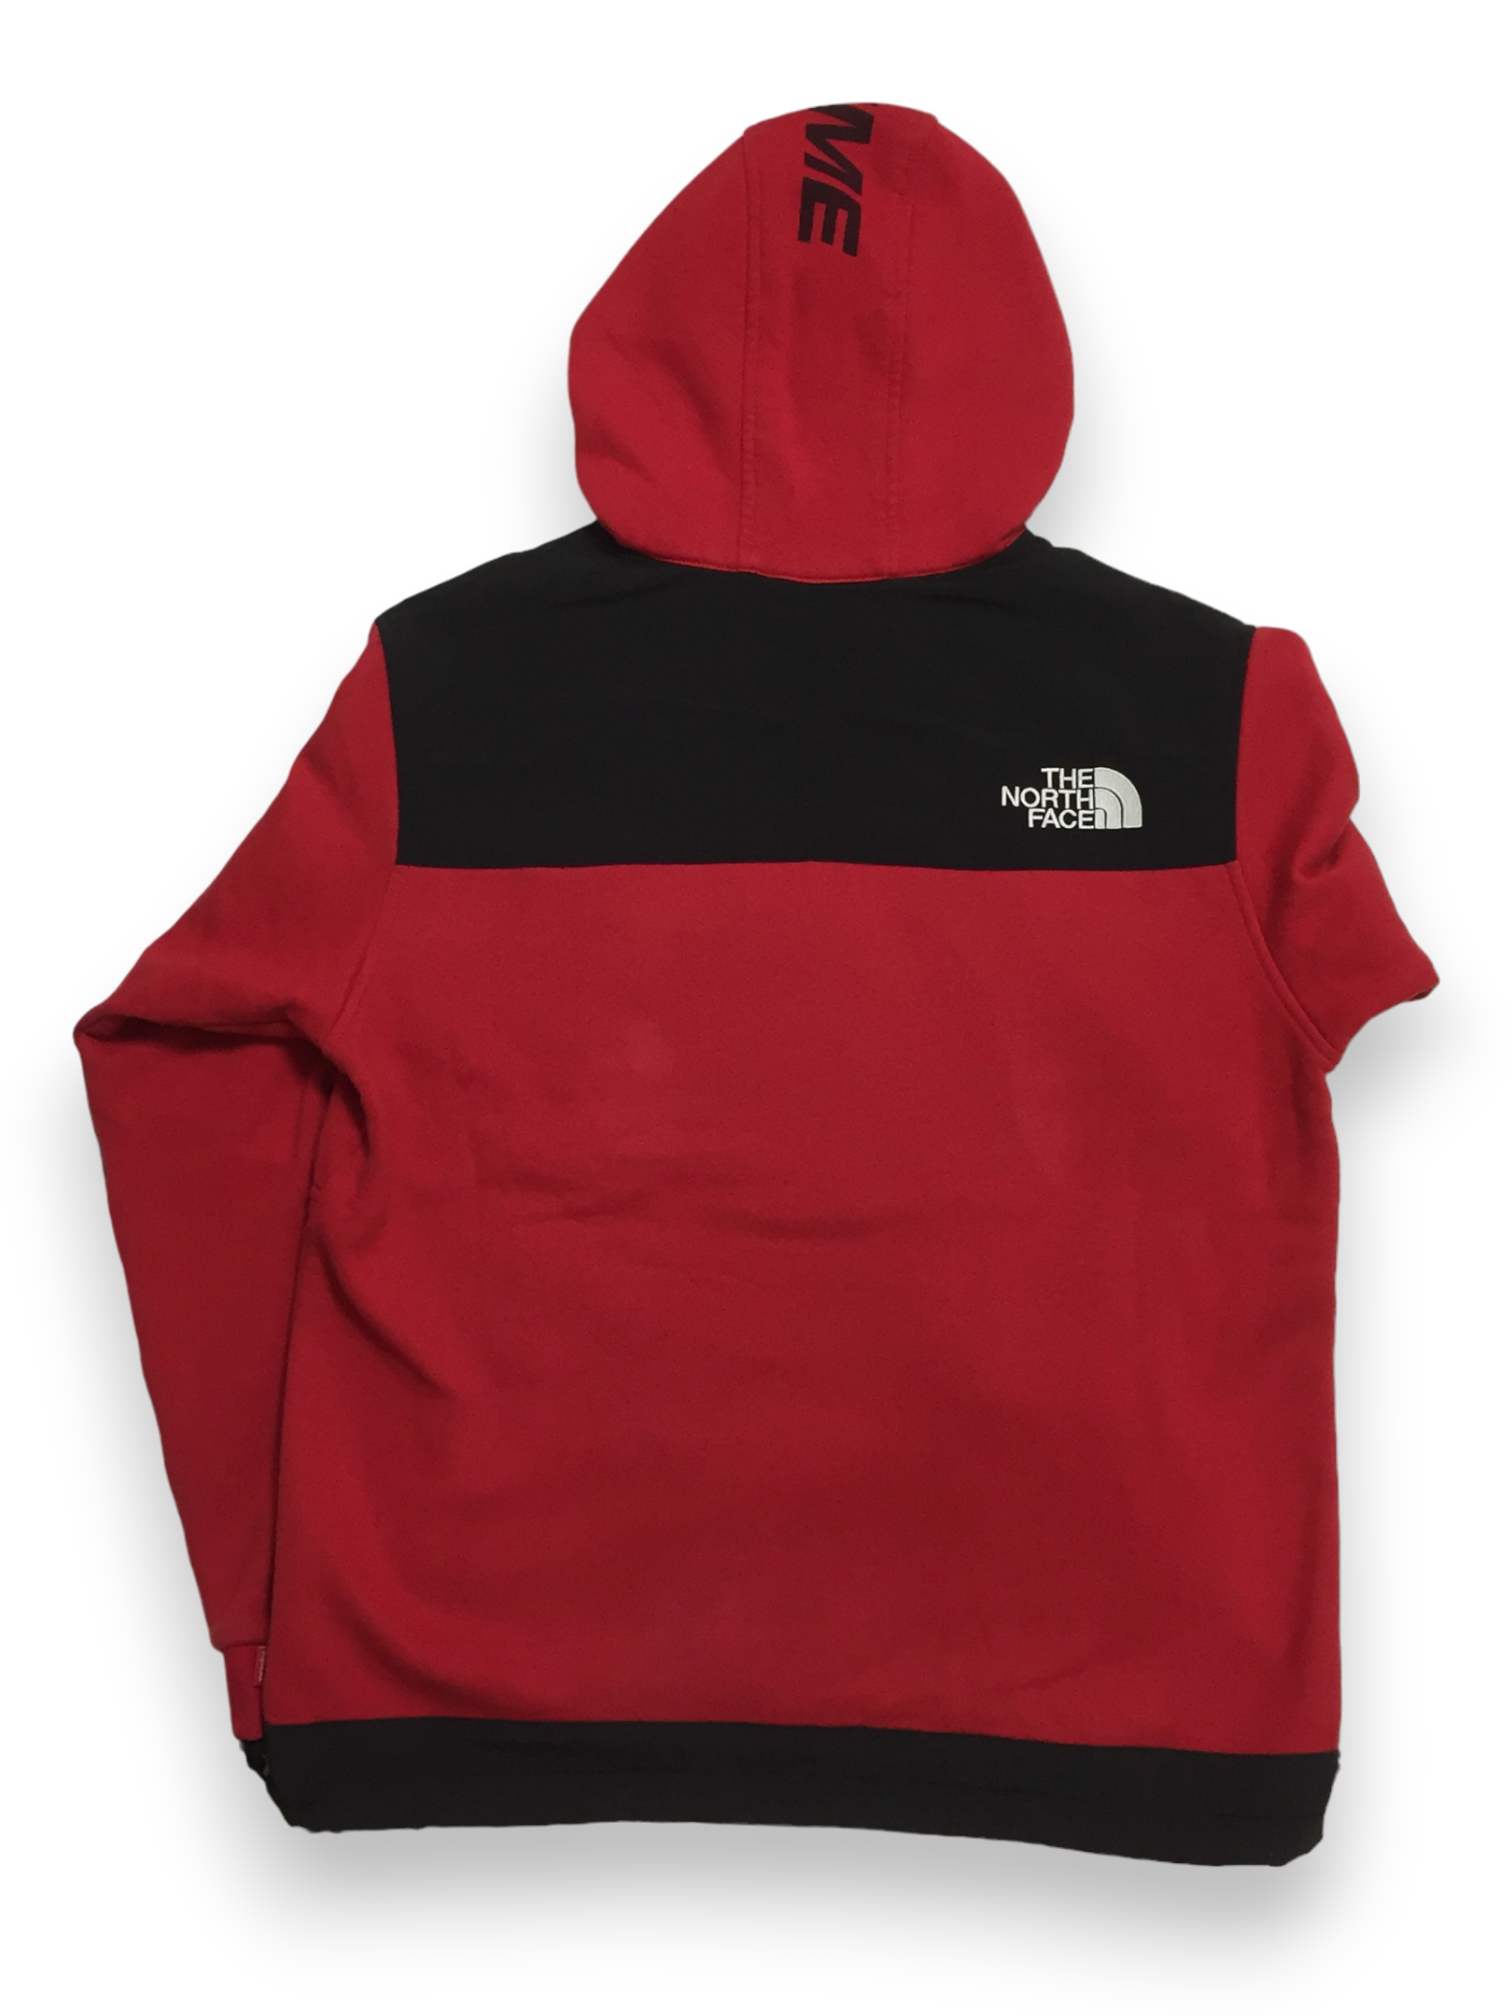 2016 Supreme x The North Face Steep Tech Red Fleece